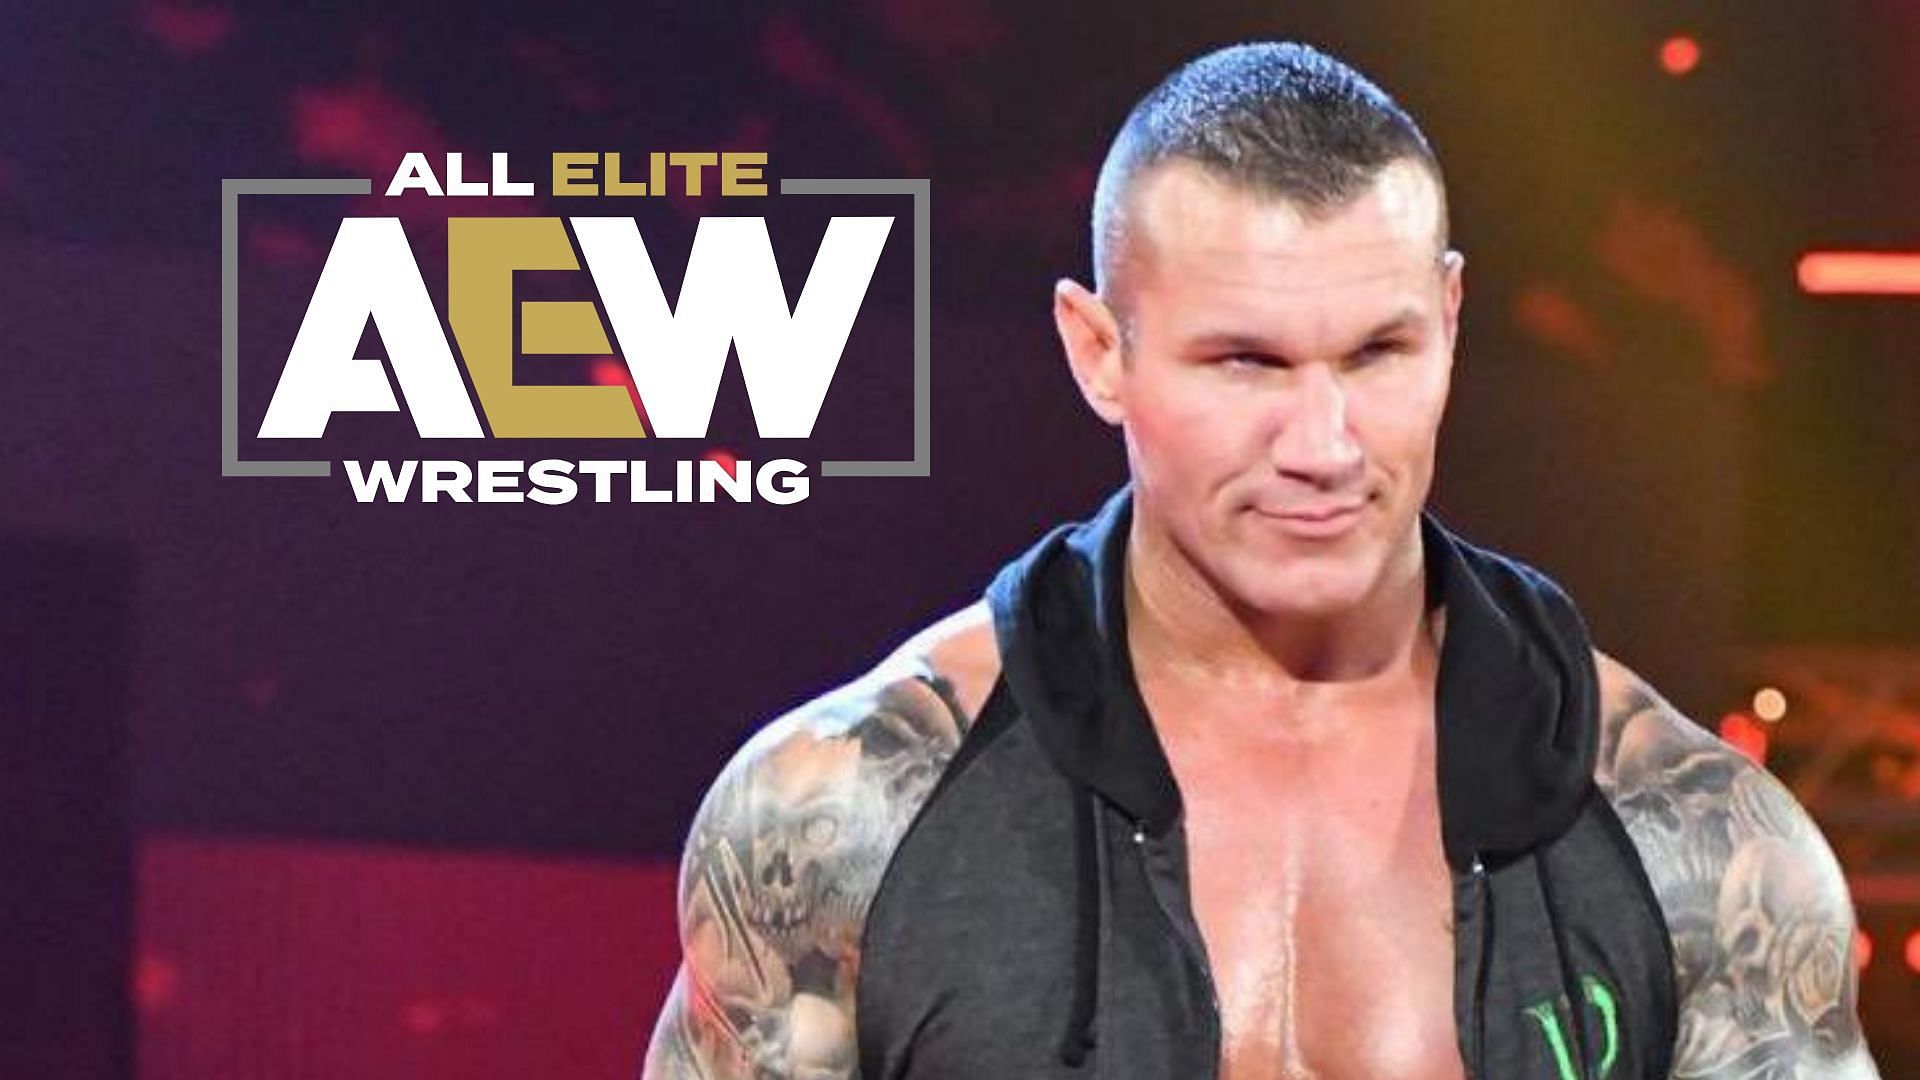 Is Randy Orton one of the greatest wrestlers in the world?